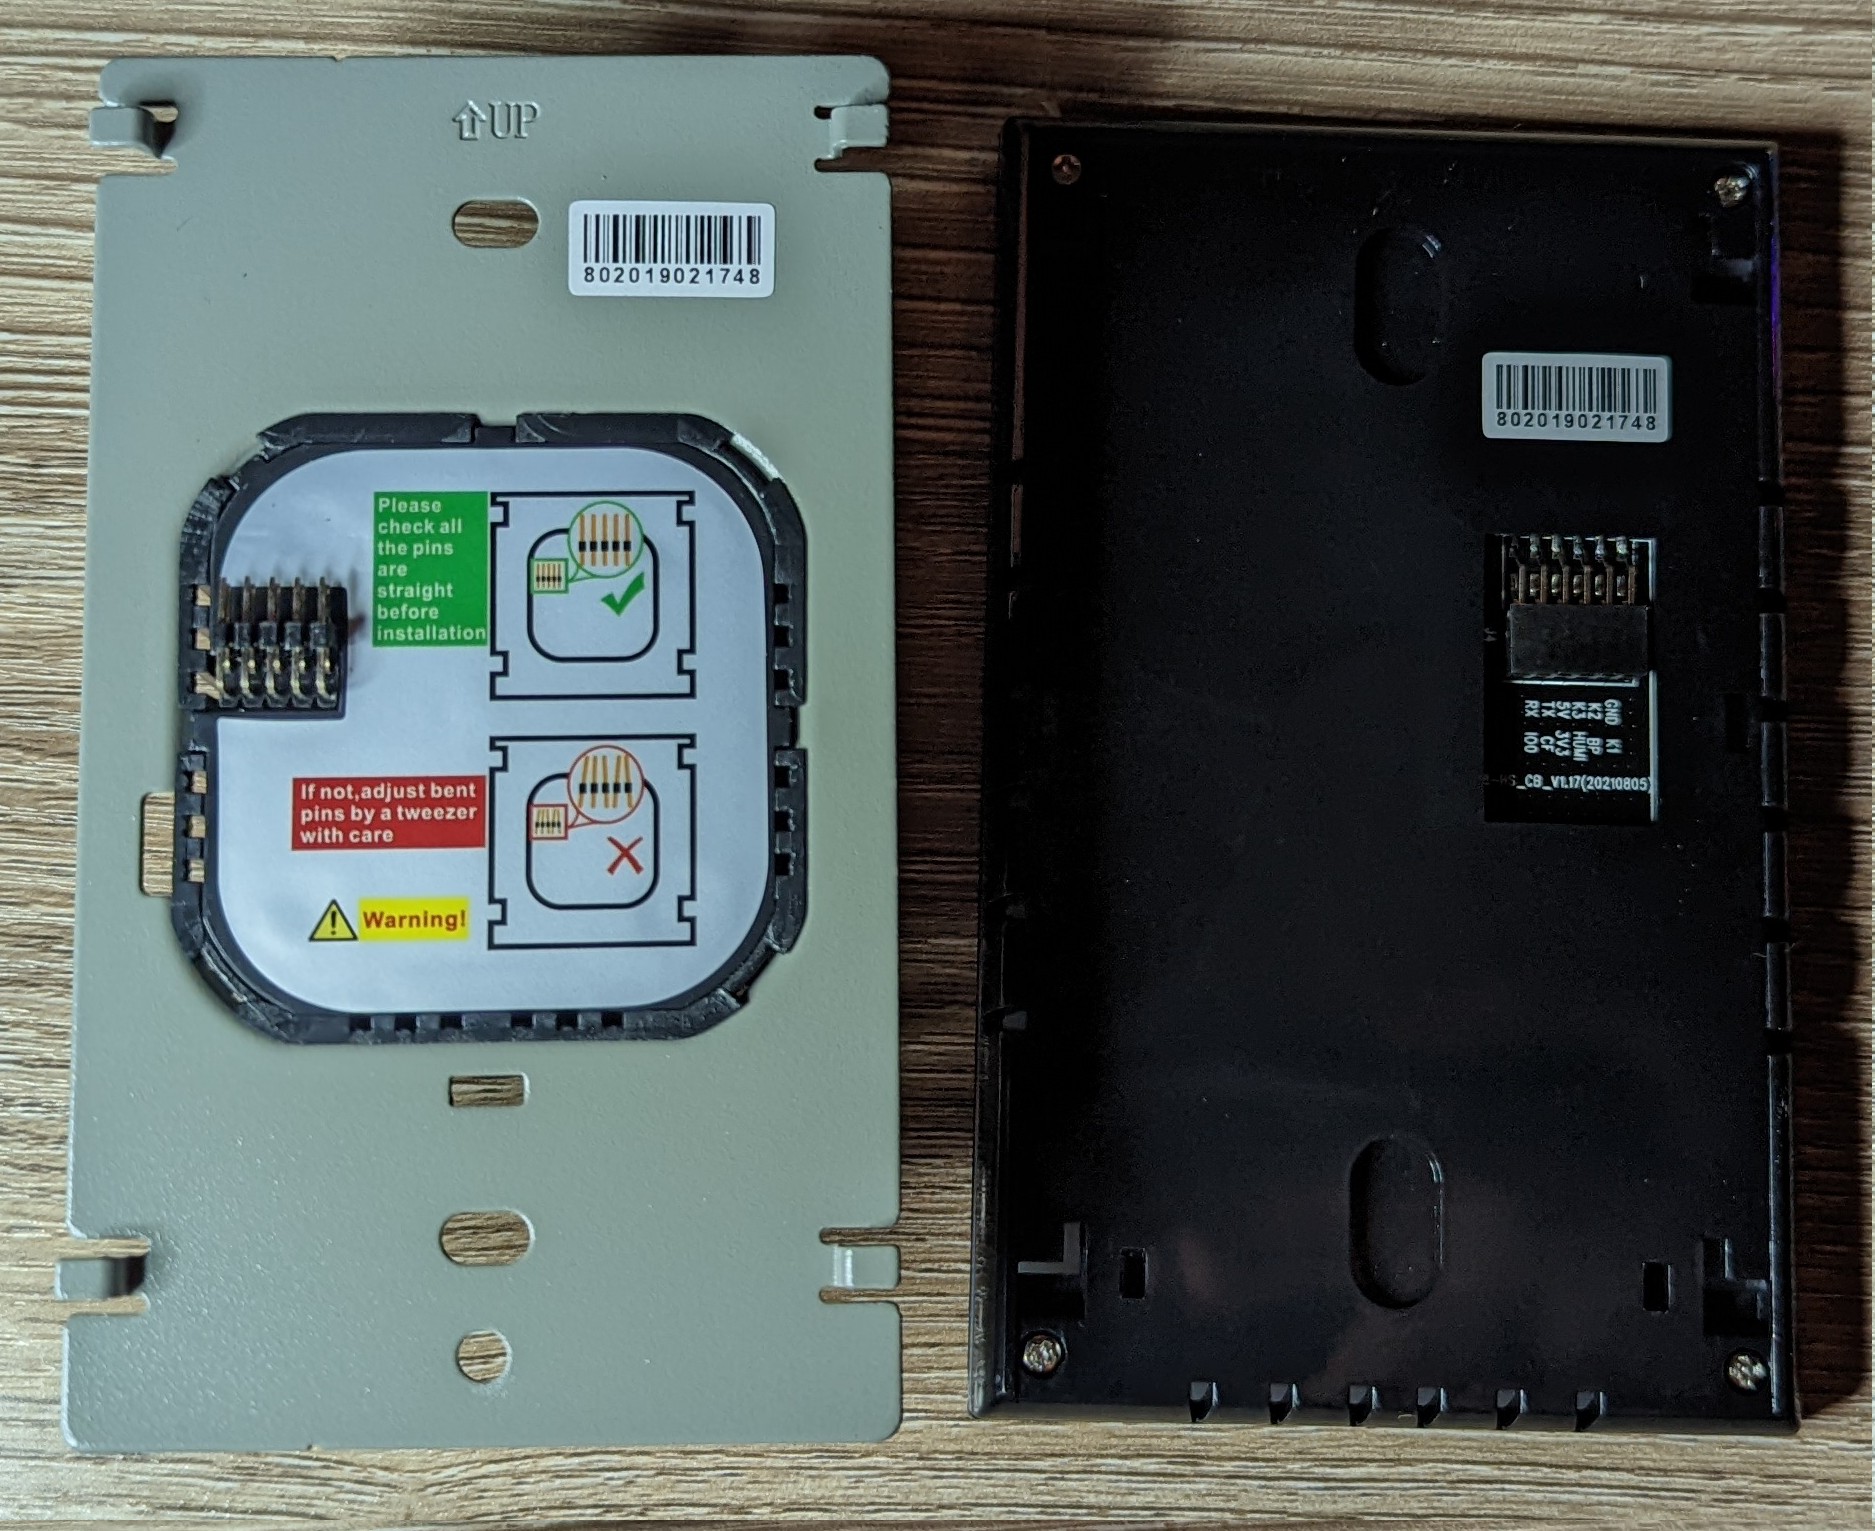 Picture showing the rear of the switch screen panel and the front of the power module that would be installed in the wall.